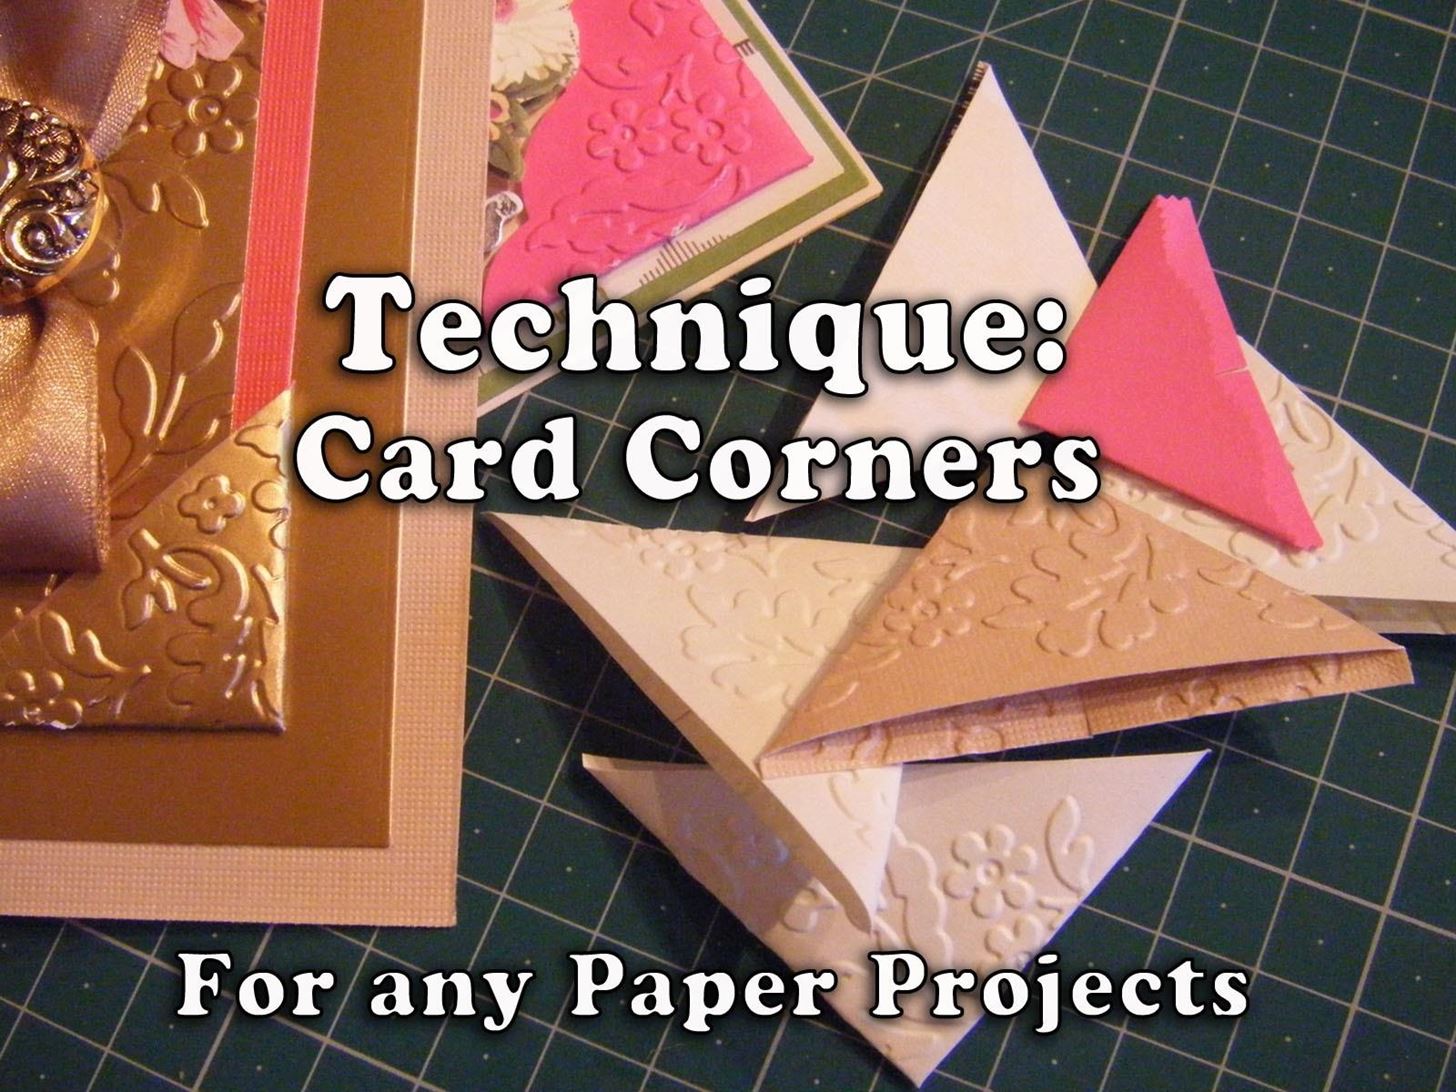 Technique: How to Make Card Corners for Your Paper Projects